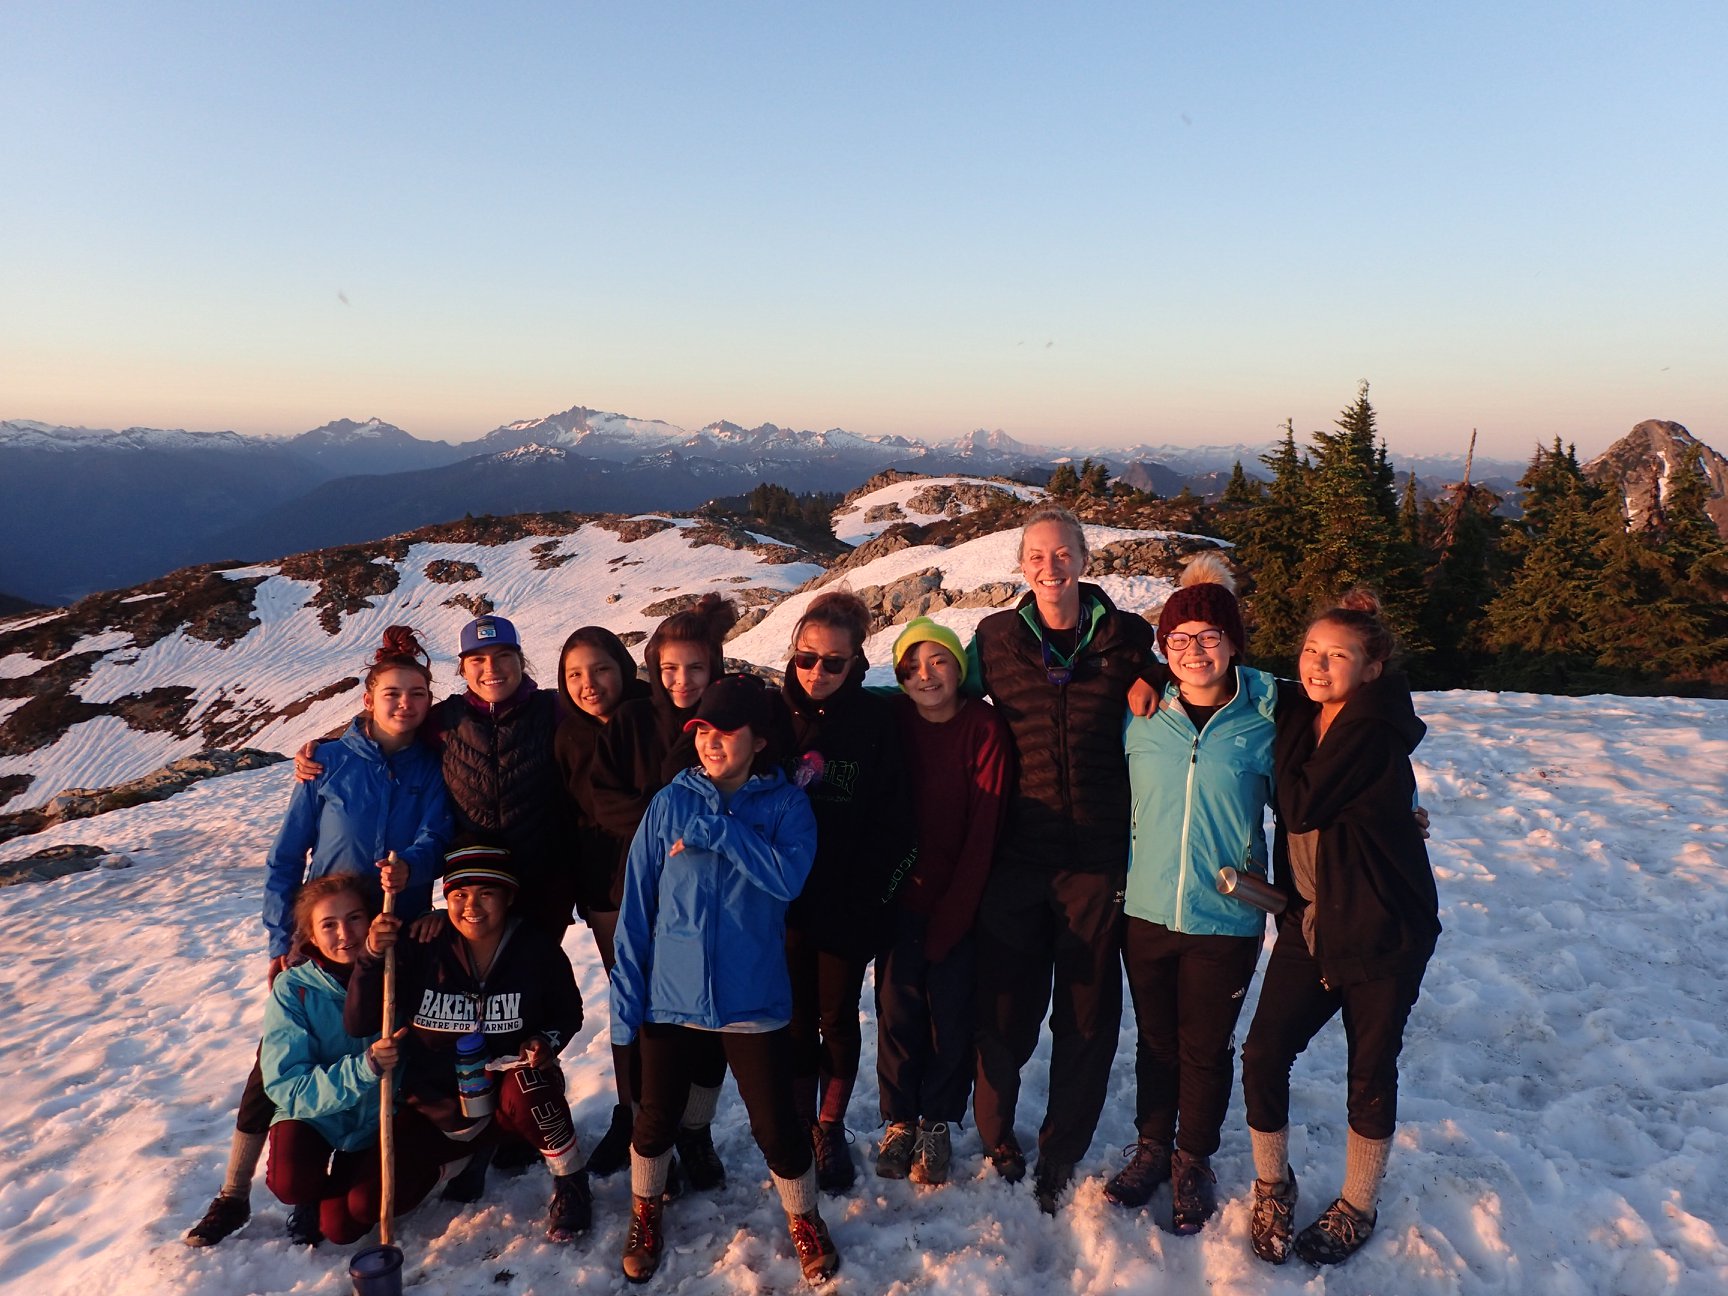  Group photo of 12 smiling girls on top of snowy mountain 